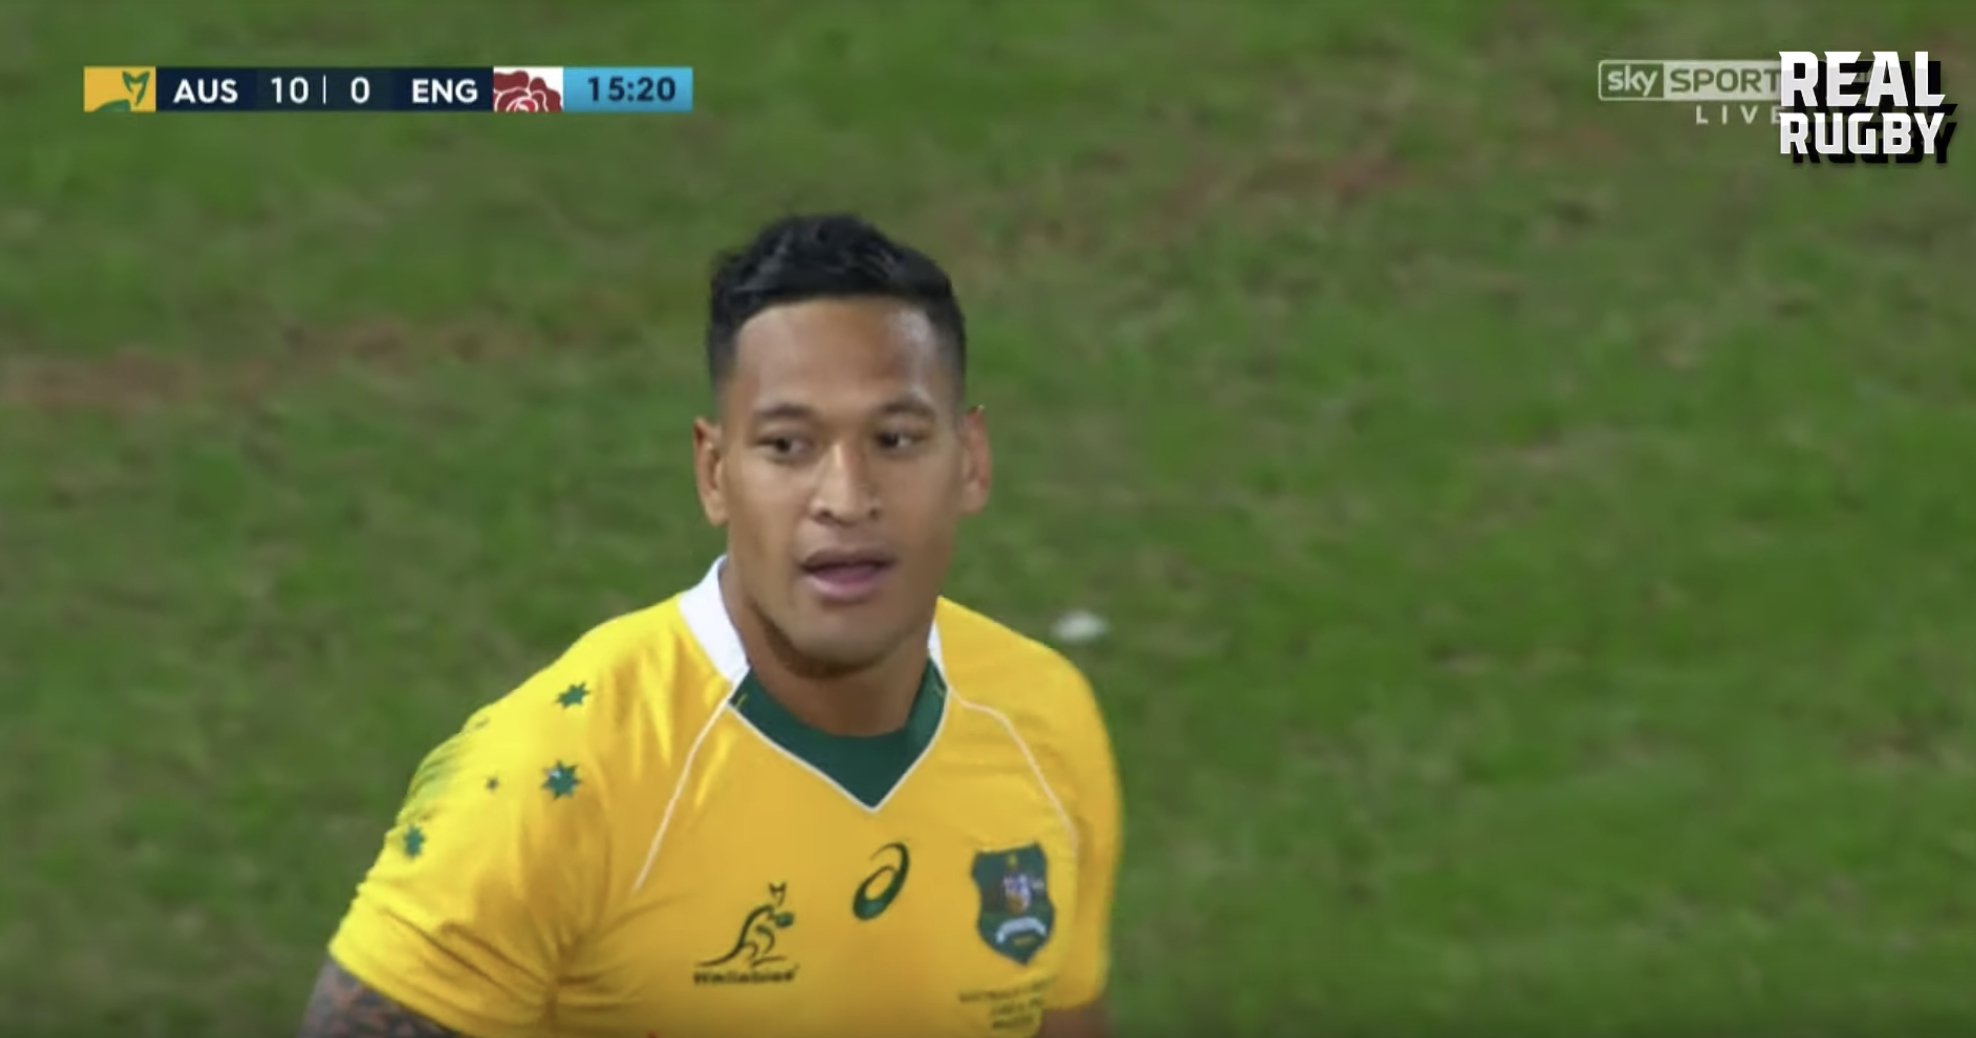 VIDEO: An incredible 30 minute long highlight reel has dropped on Israel Folau at the worst time possible